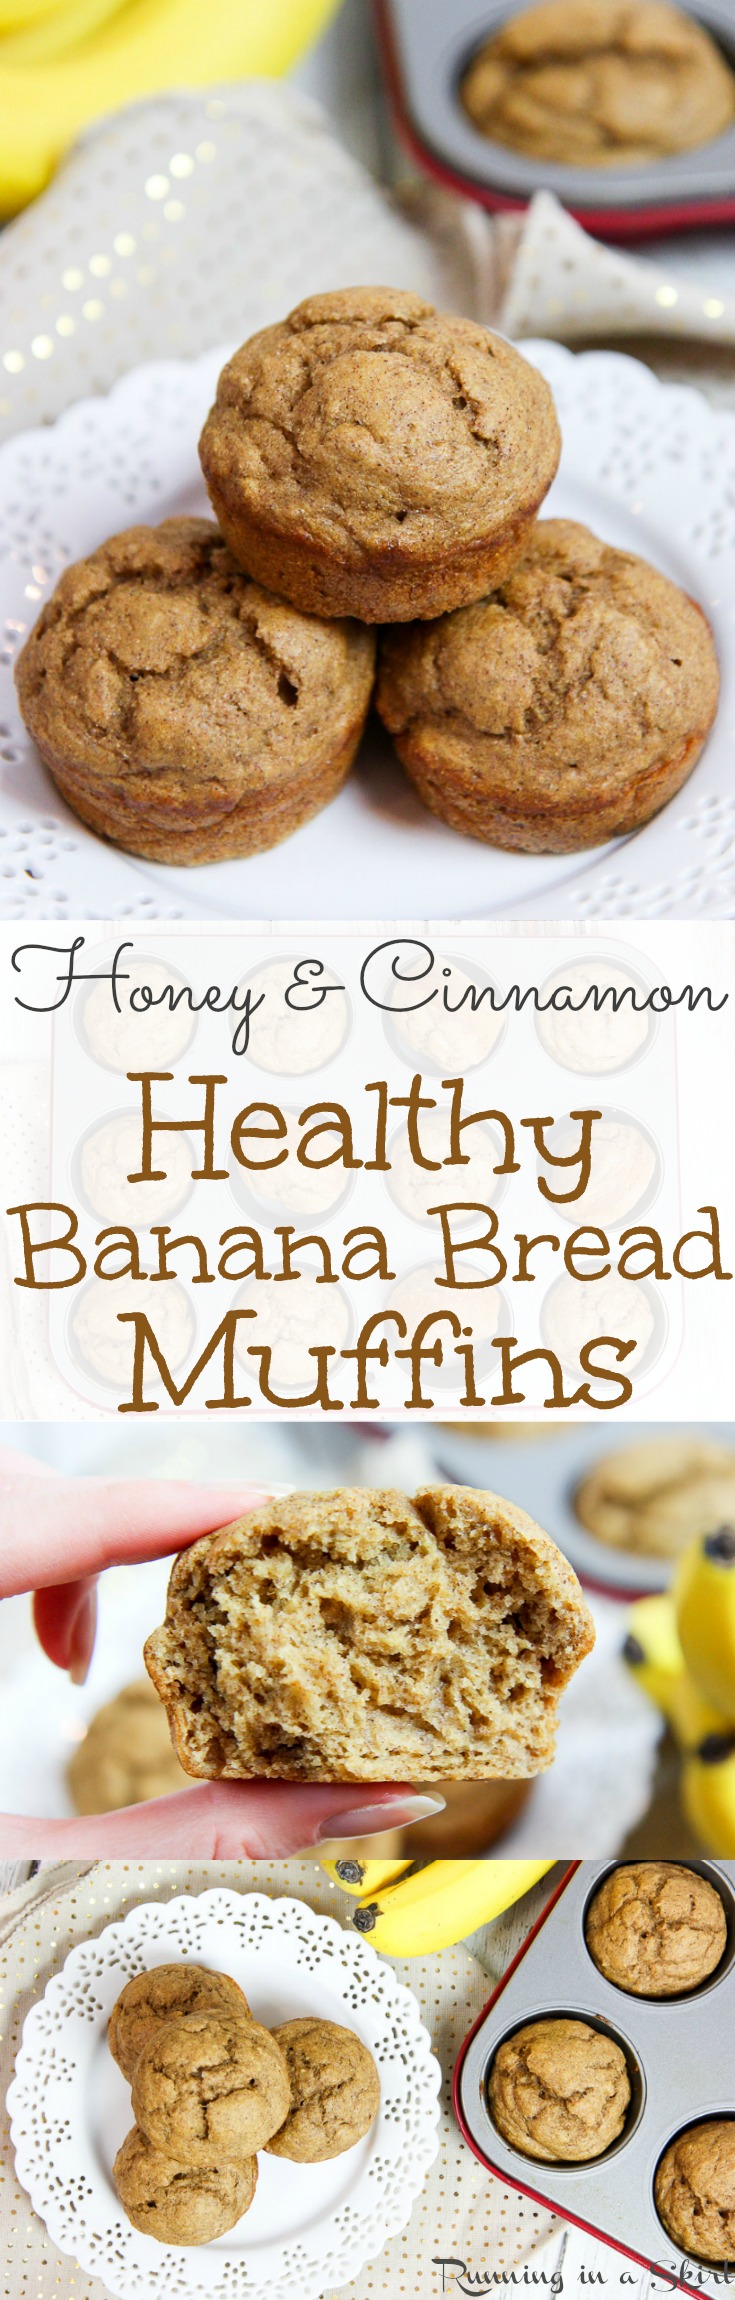 Healthy Clean Eating Banana Bread Muffins recipe / Running in a Skirt